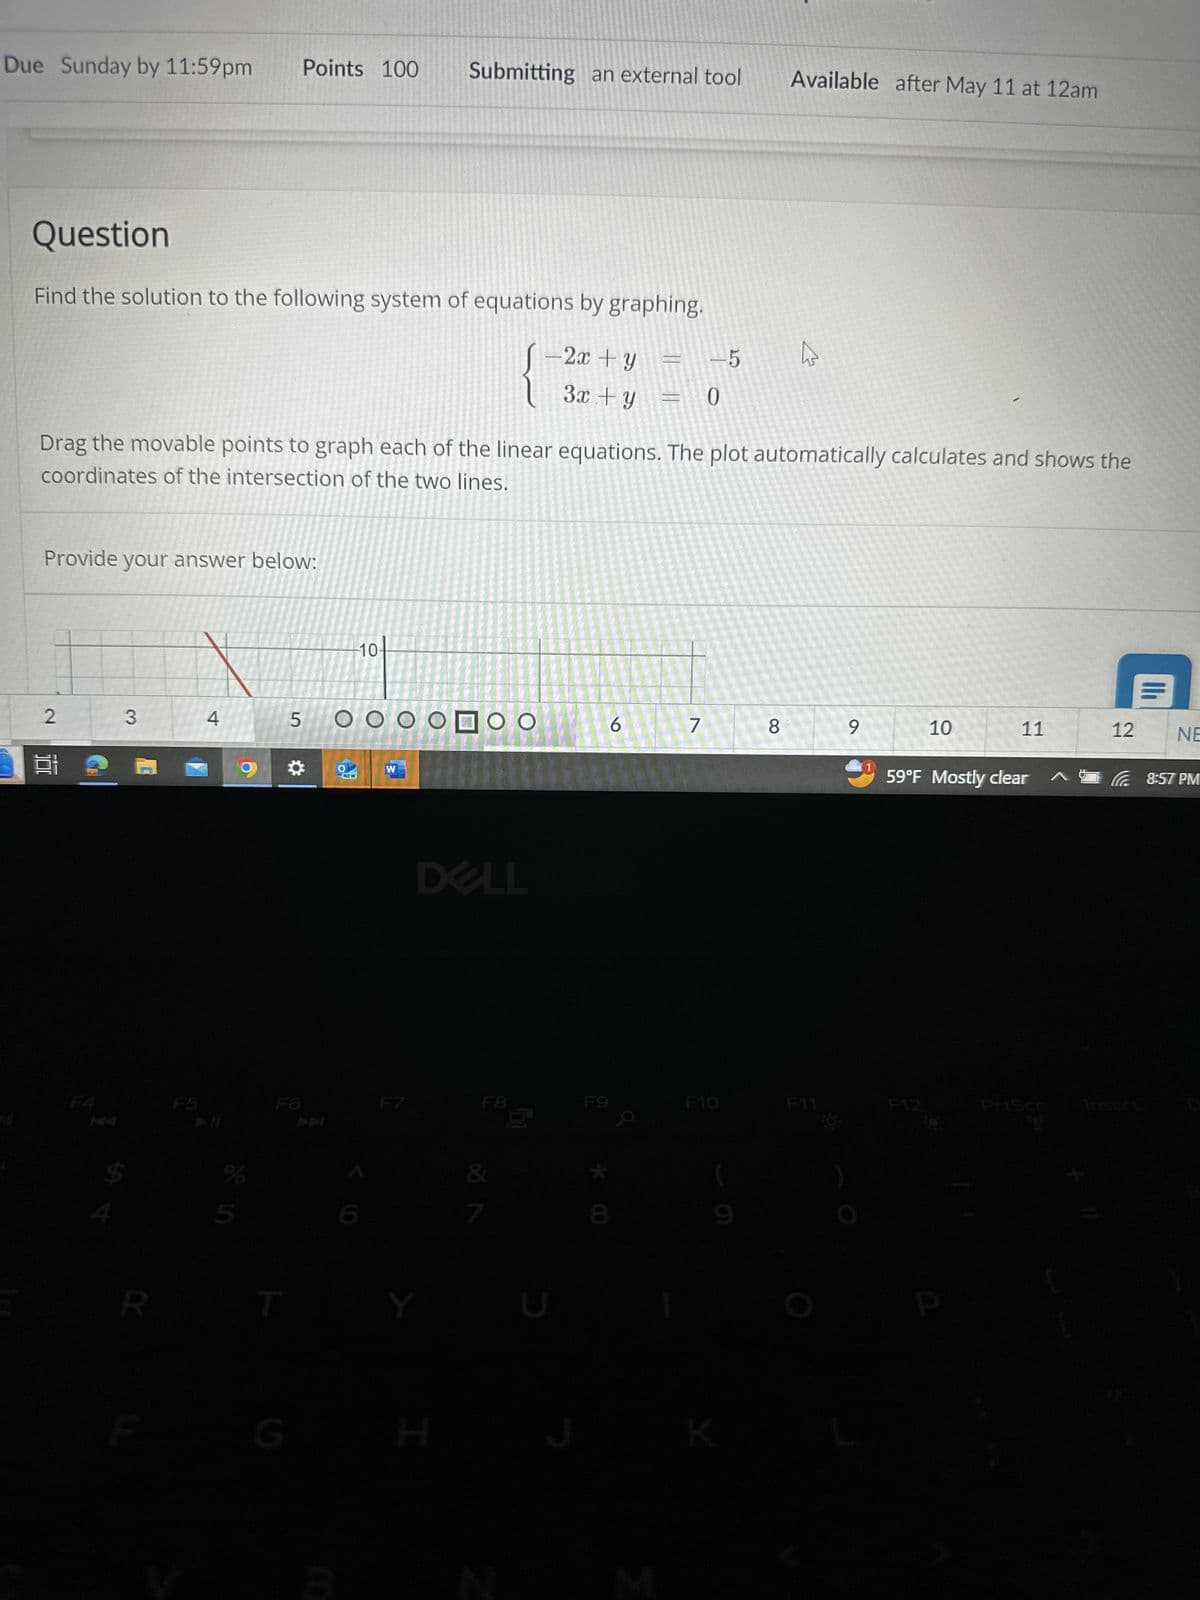 Due Sunday by 11:59pm Points 100 Submitting an external tool
Available after May 11 at 12am
Question
Find the solution to the following system of equations by graphing.
- 2x + y
3x + y
-5
0
Drag the movable points to graph each of the linear equations. The plot automatically calculates and shows the
coordinates of the intersection of the two lines.
Provide your answer below:
2
3
4
5
F4
FS
F6
10-
OOOOOOO
NEW
W
DELL
6
10
7
8
9
10
11
12
NE
59°F Mostly clear
8:57 PM
F7
F8
F9
F10
F11
F12
PriScr
Insert
R
T
Y
G
H
8*
K